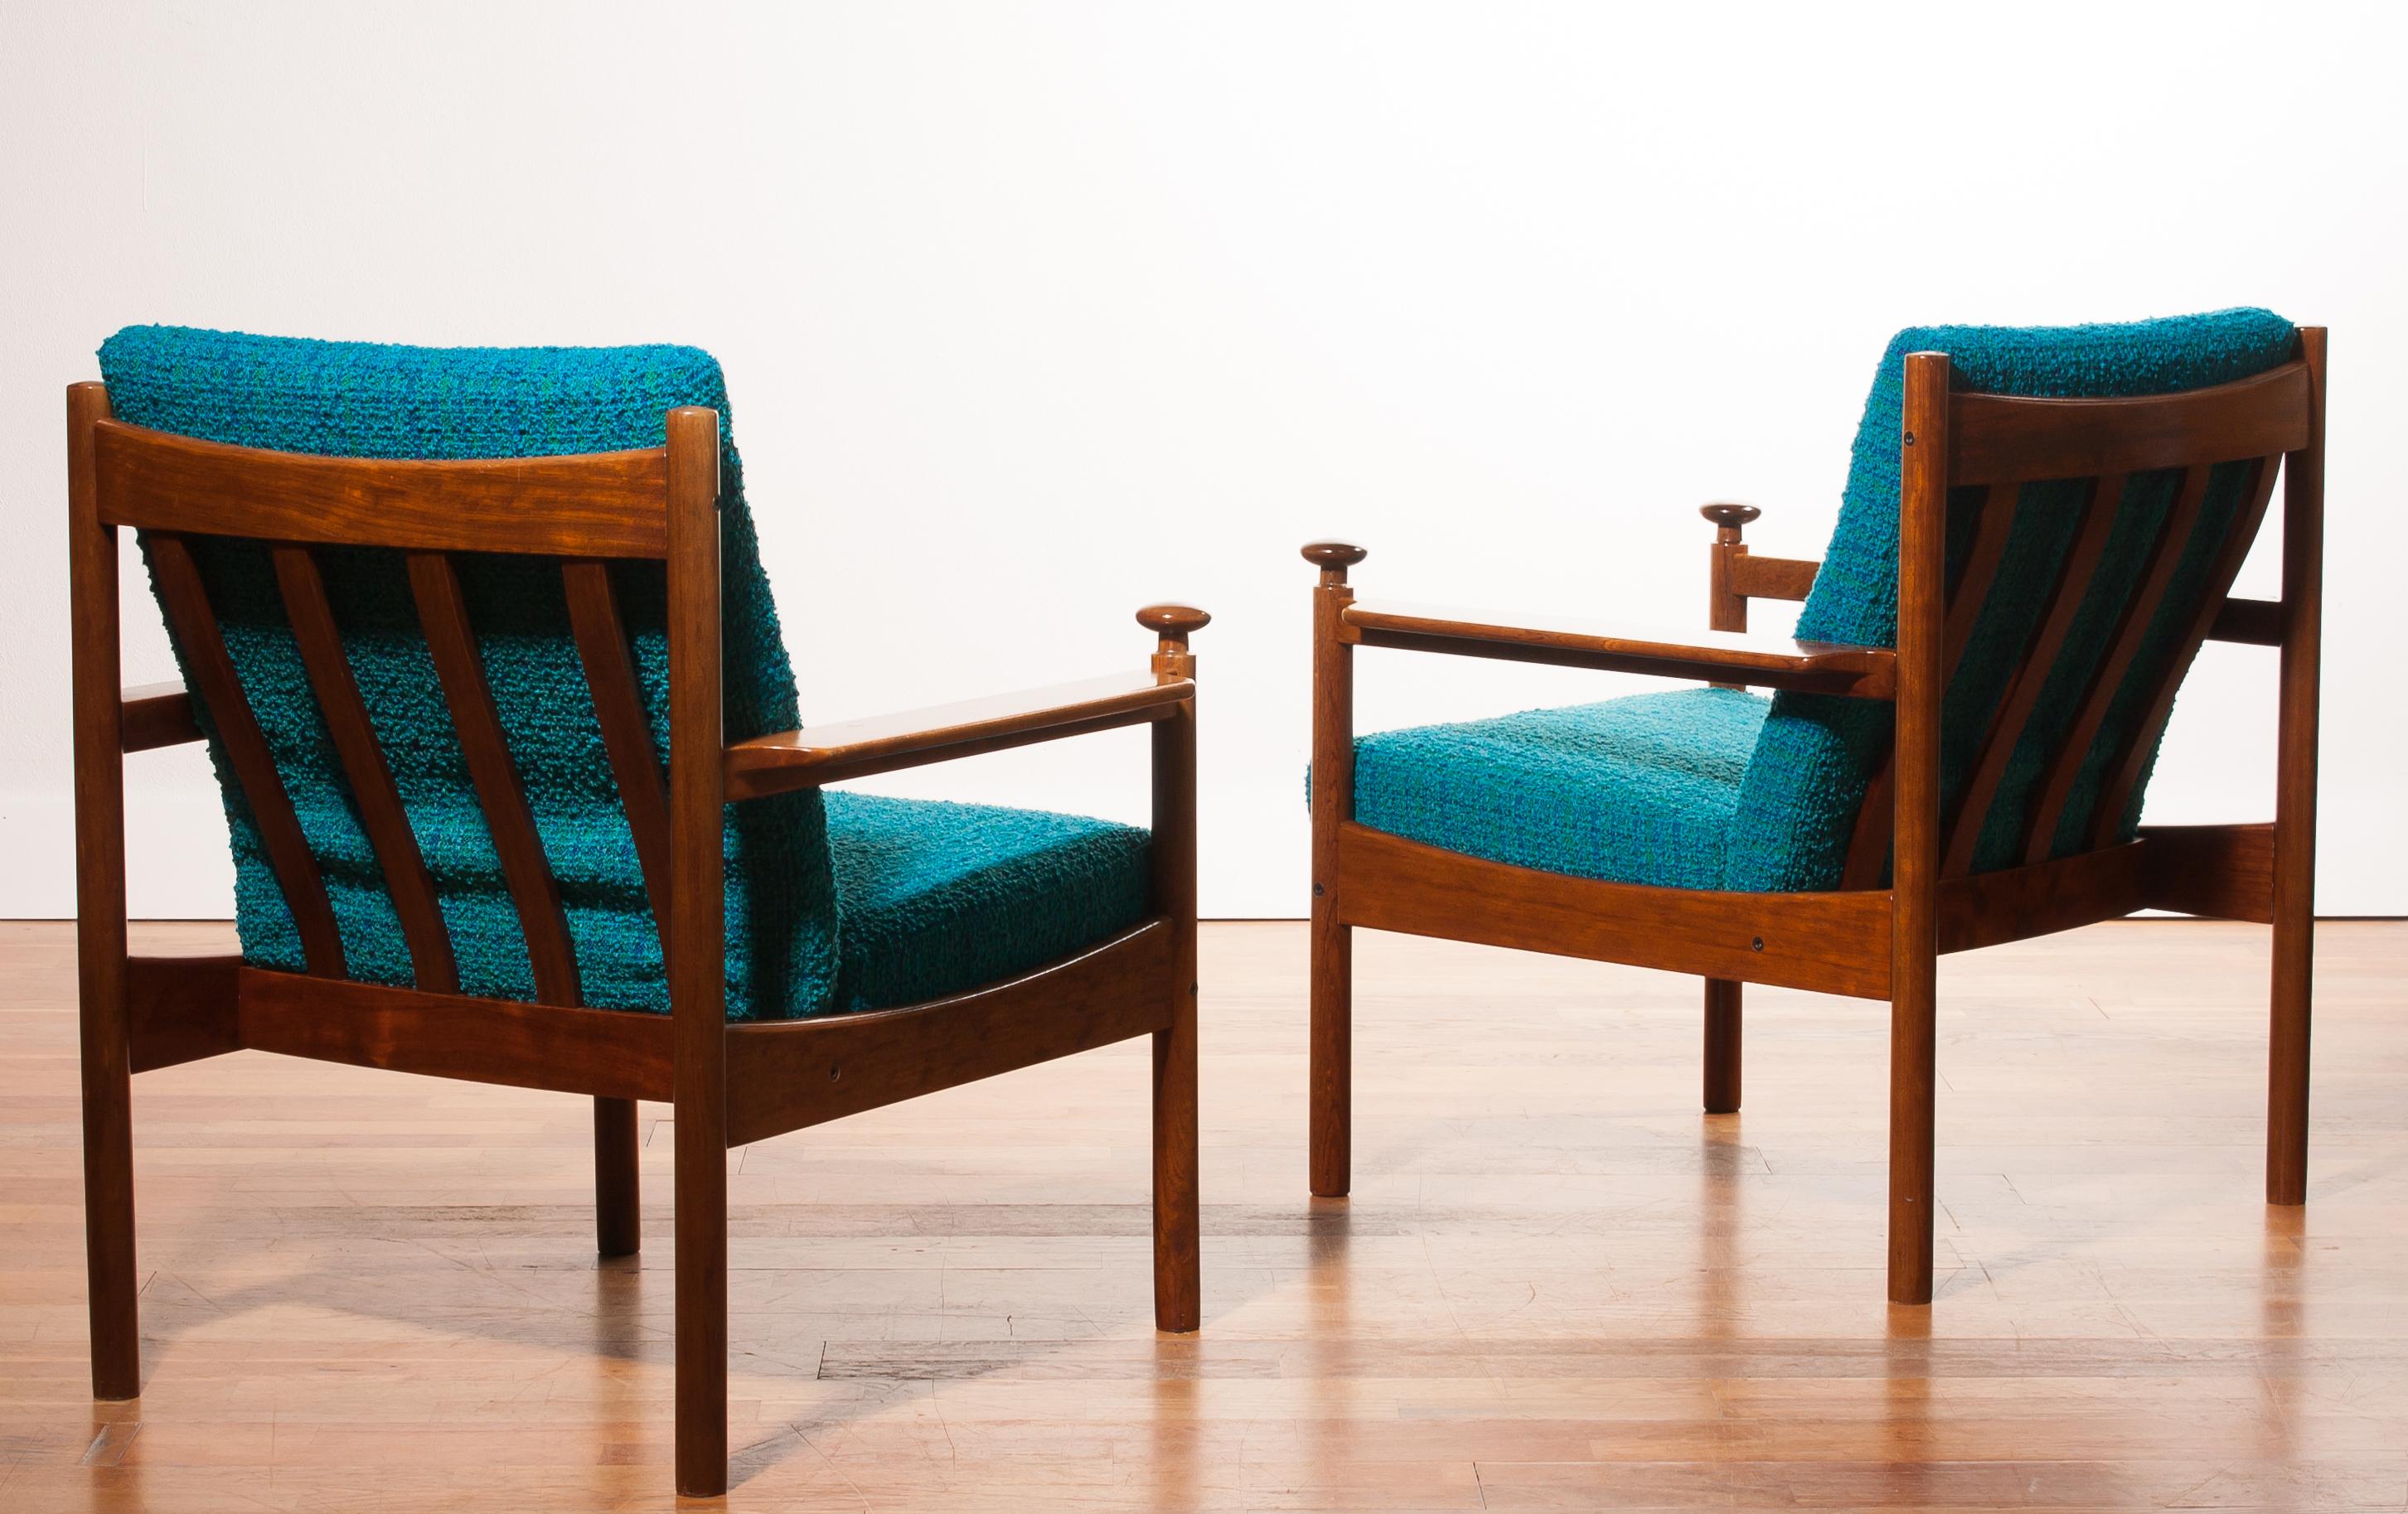 Mid-20th Century 1950s, a Pair of Chairs by Torbjørn Afdal for Sandvik & Co Mobler